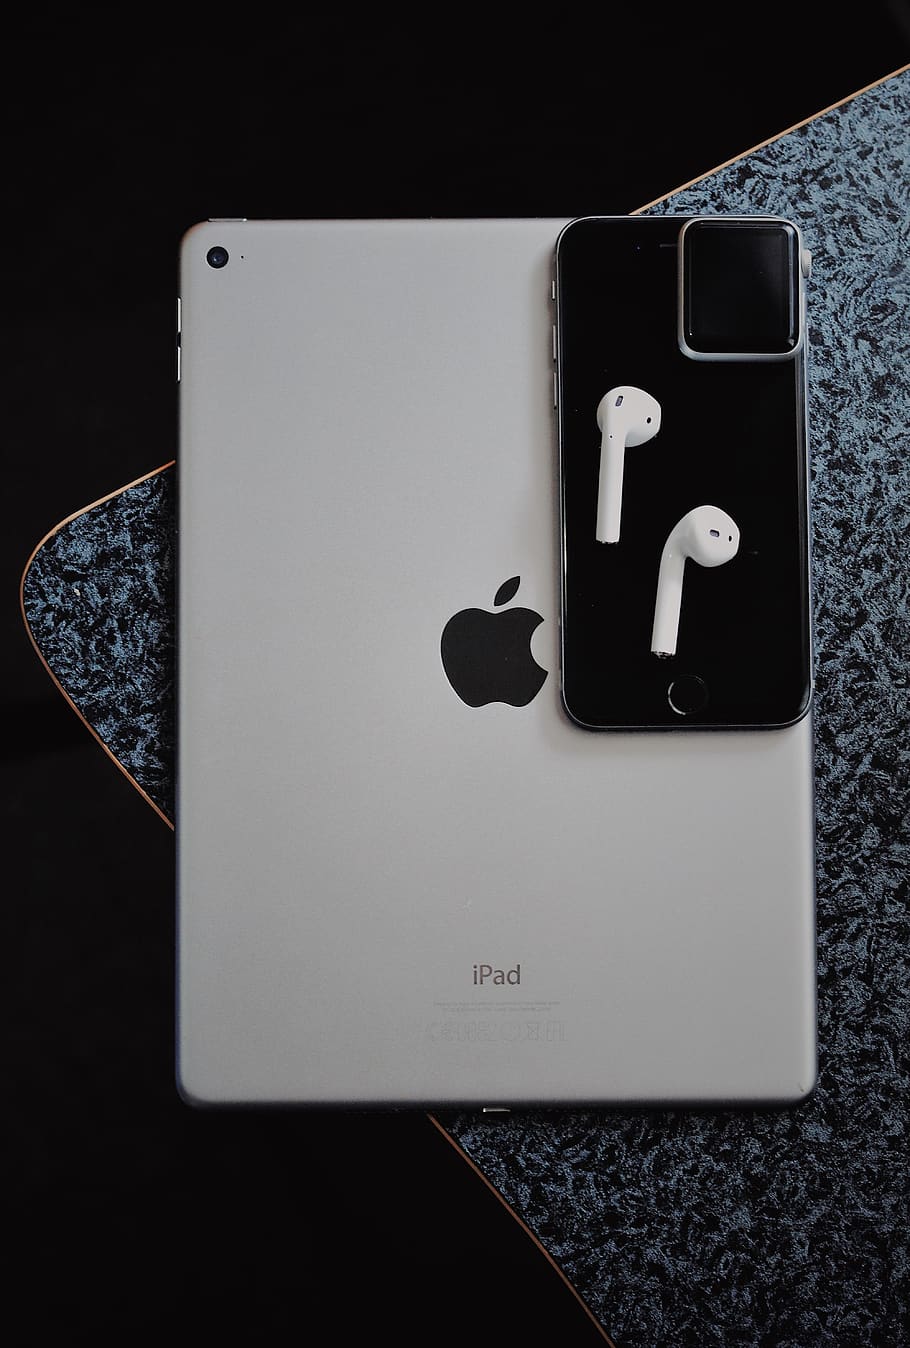 Apple, apple products, iphone, ipad, air, applewatch, airpods, HD wallpaper